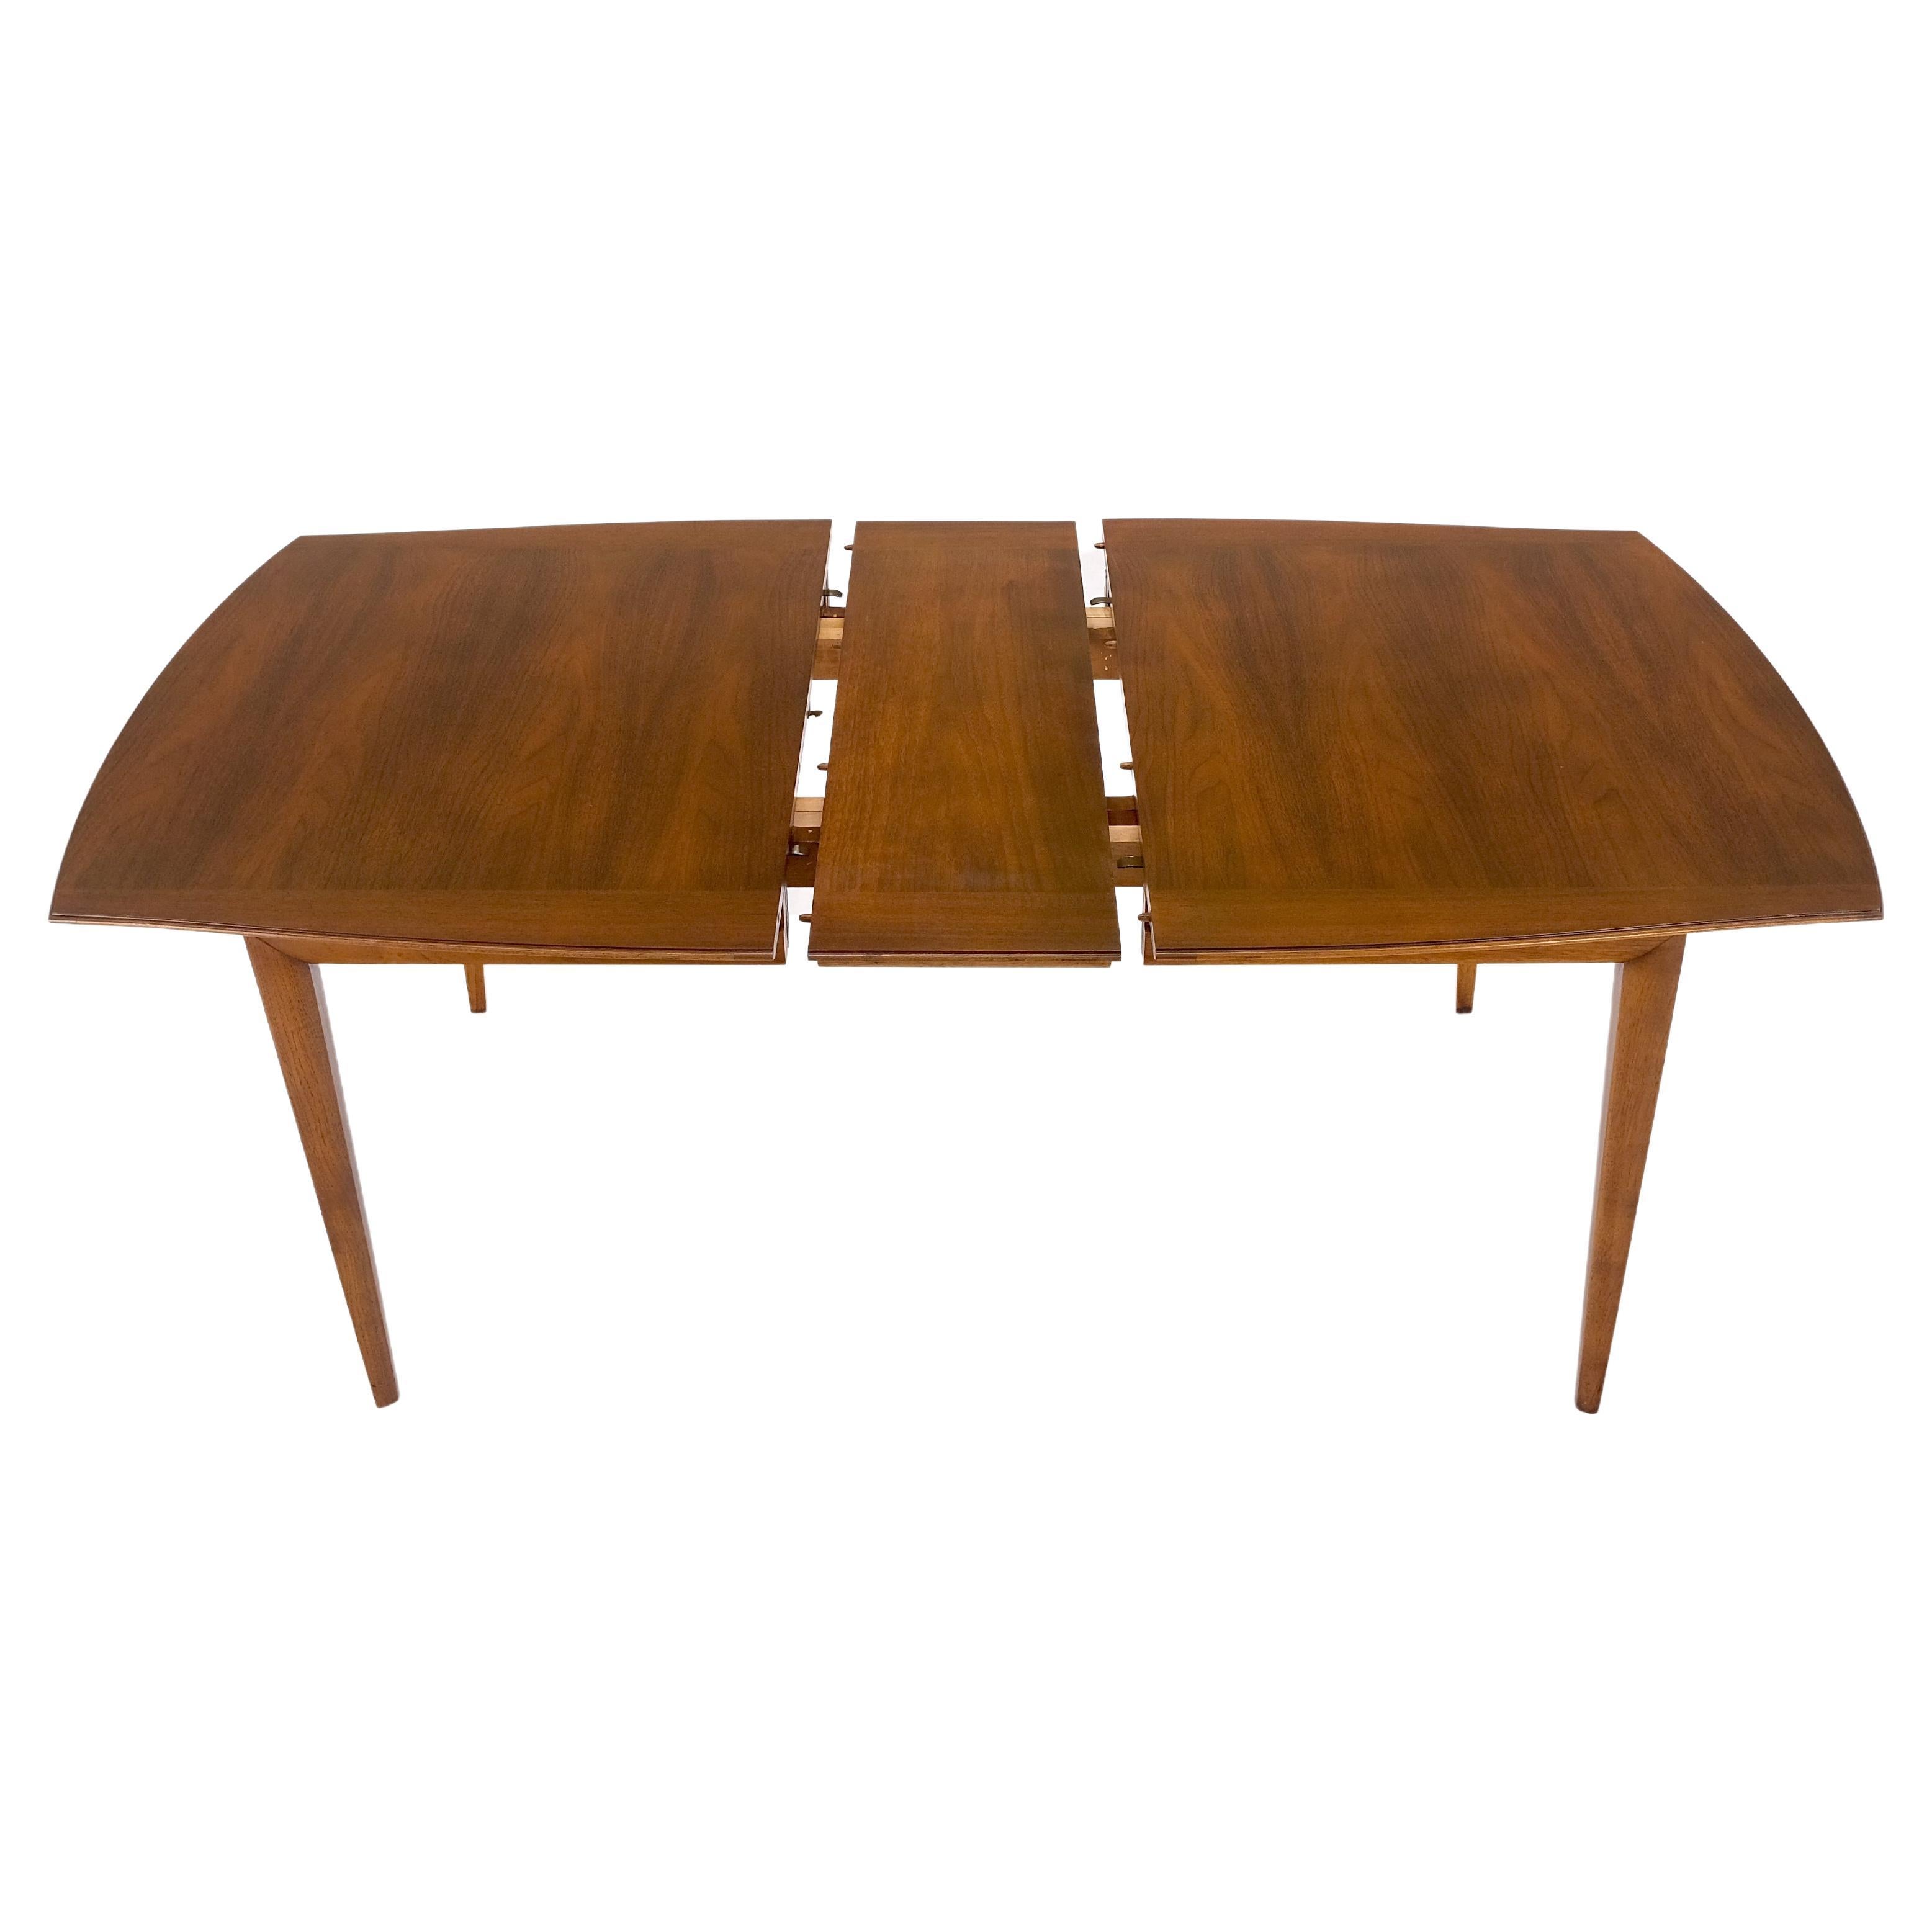 American Walnut Mid Century Modern Boat Shape Dining Table 1 Extension Leaf MINT For Sale